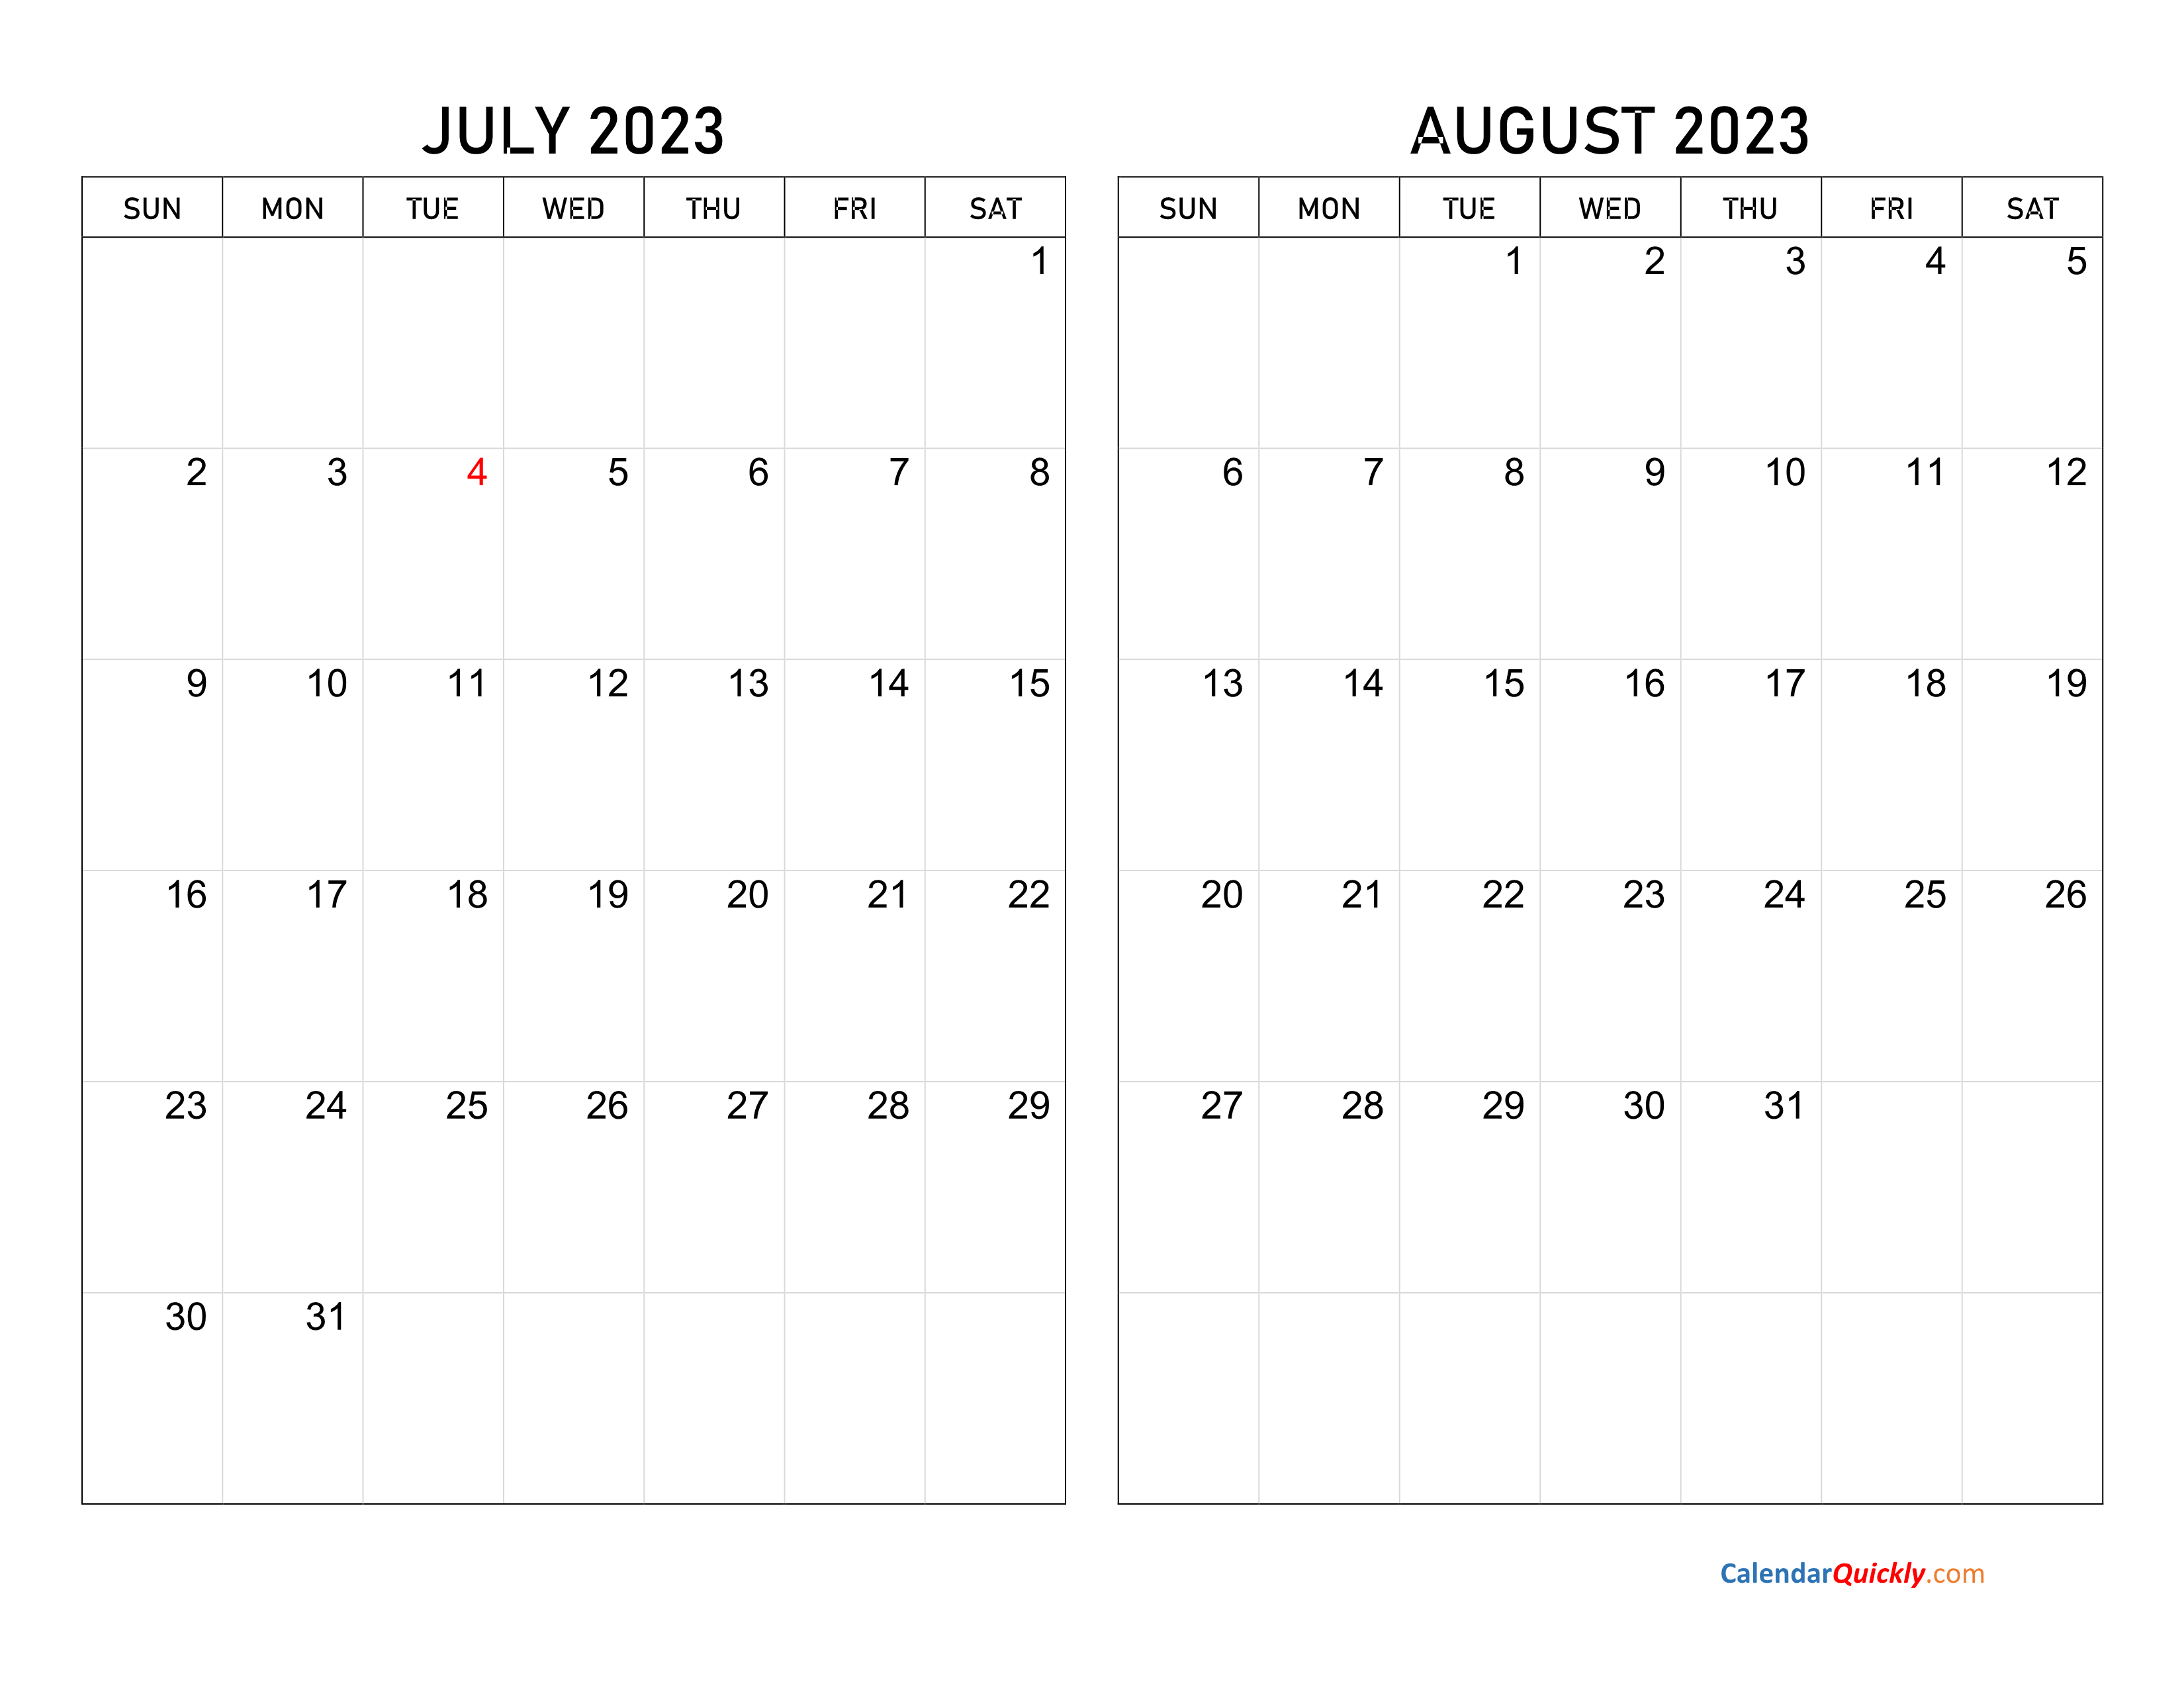 july-and-august-2023-calendar-calendar-quickly